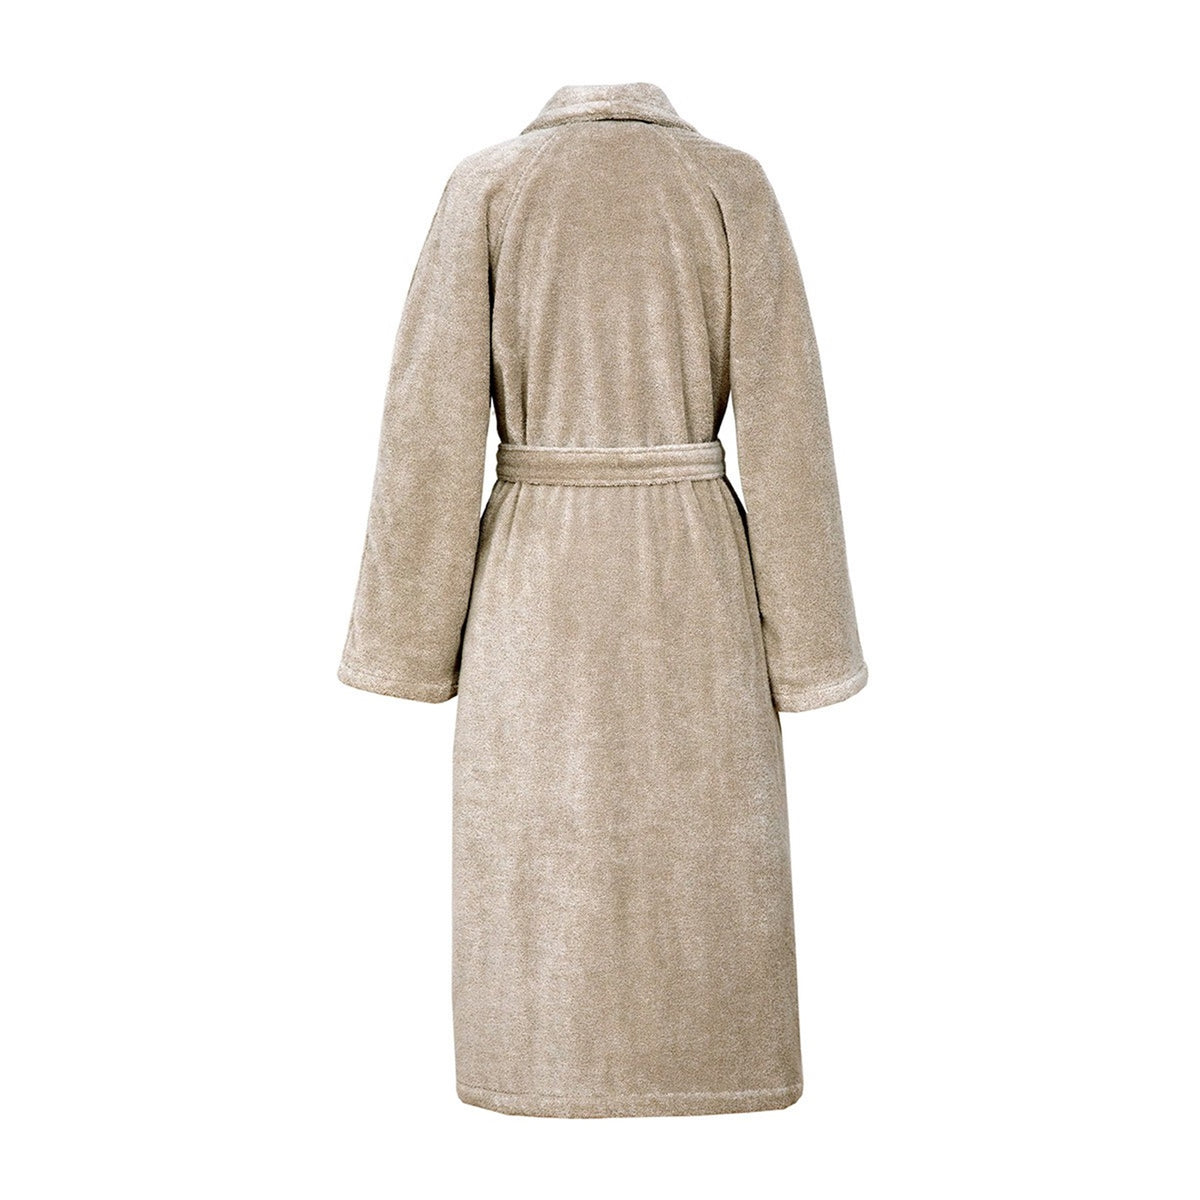 Back View of Yves Delorme Etoile Bath Robe in Color Pierre